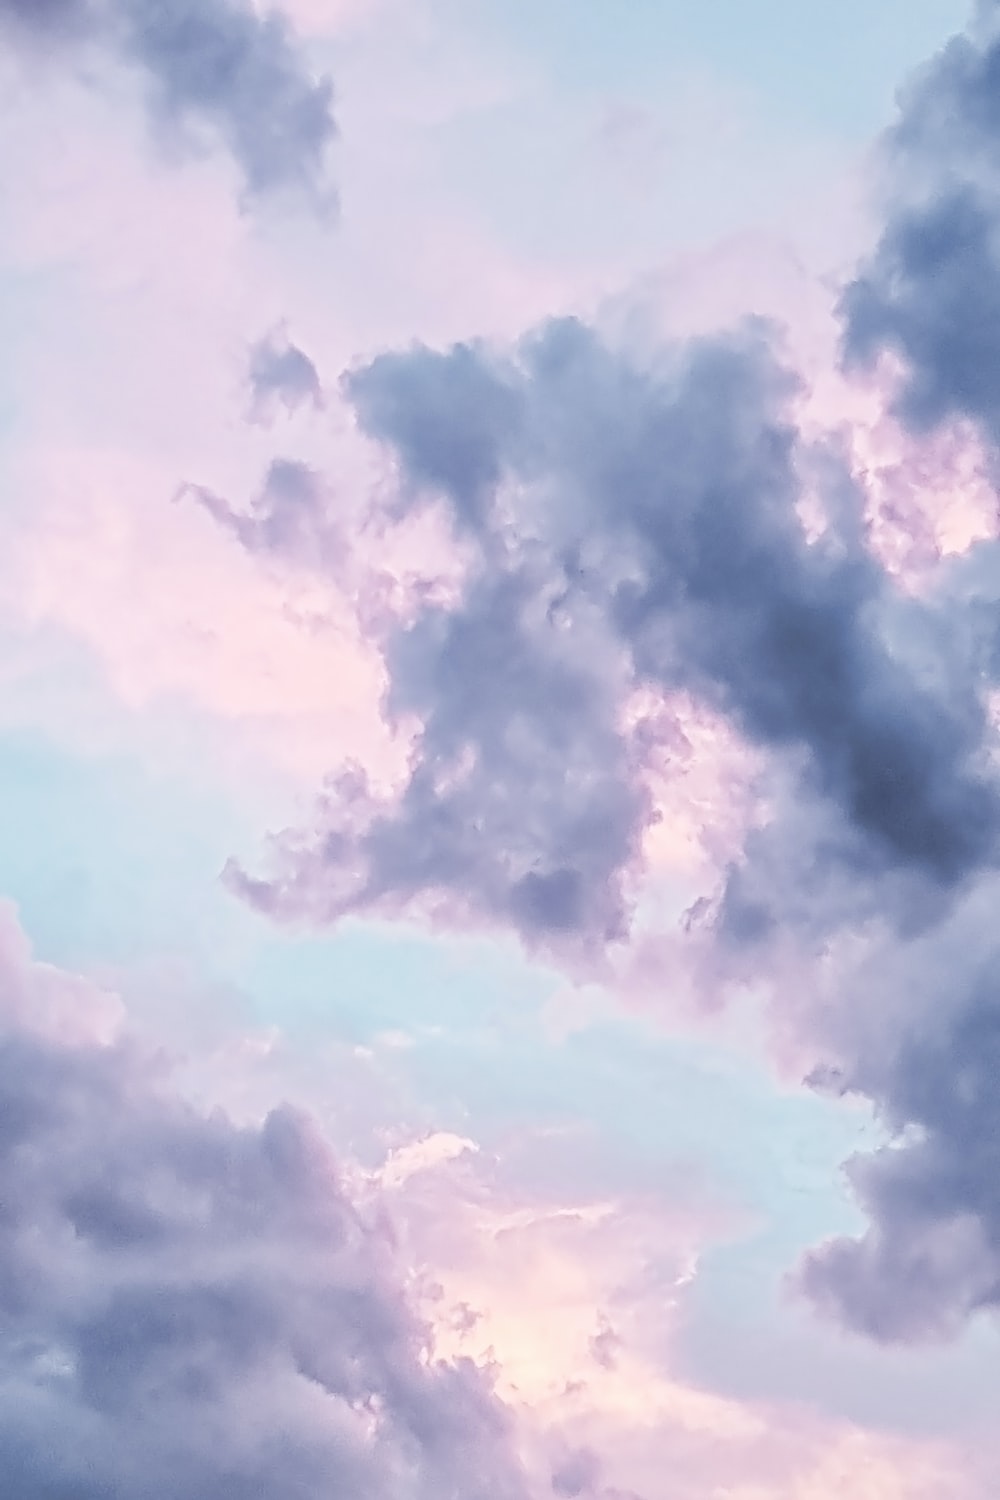 Dreamy Clouds Picture. Download Free Image